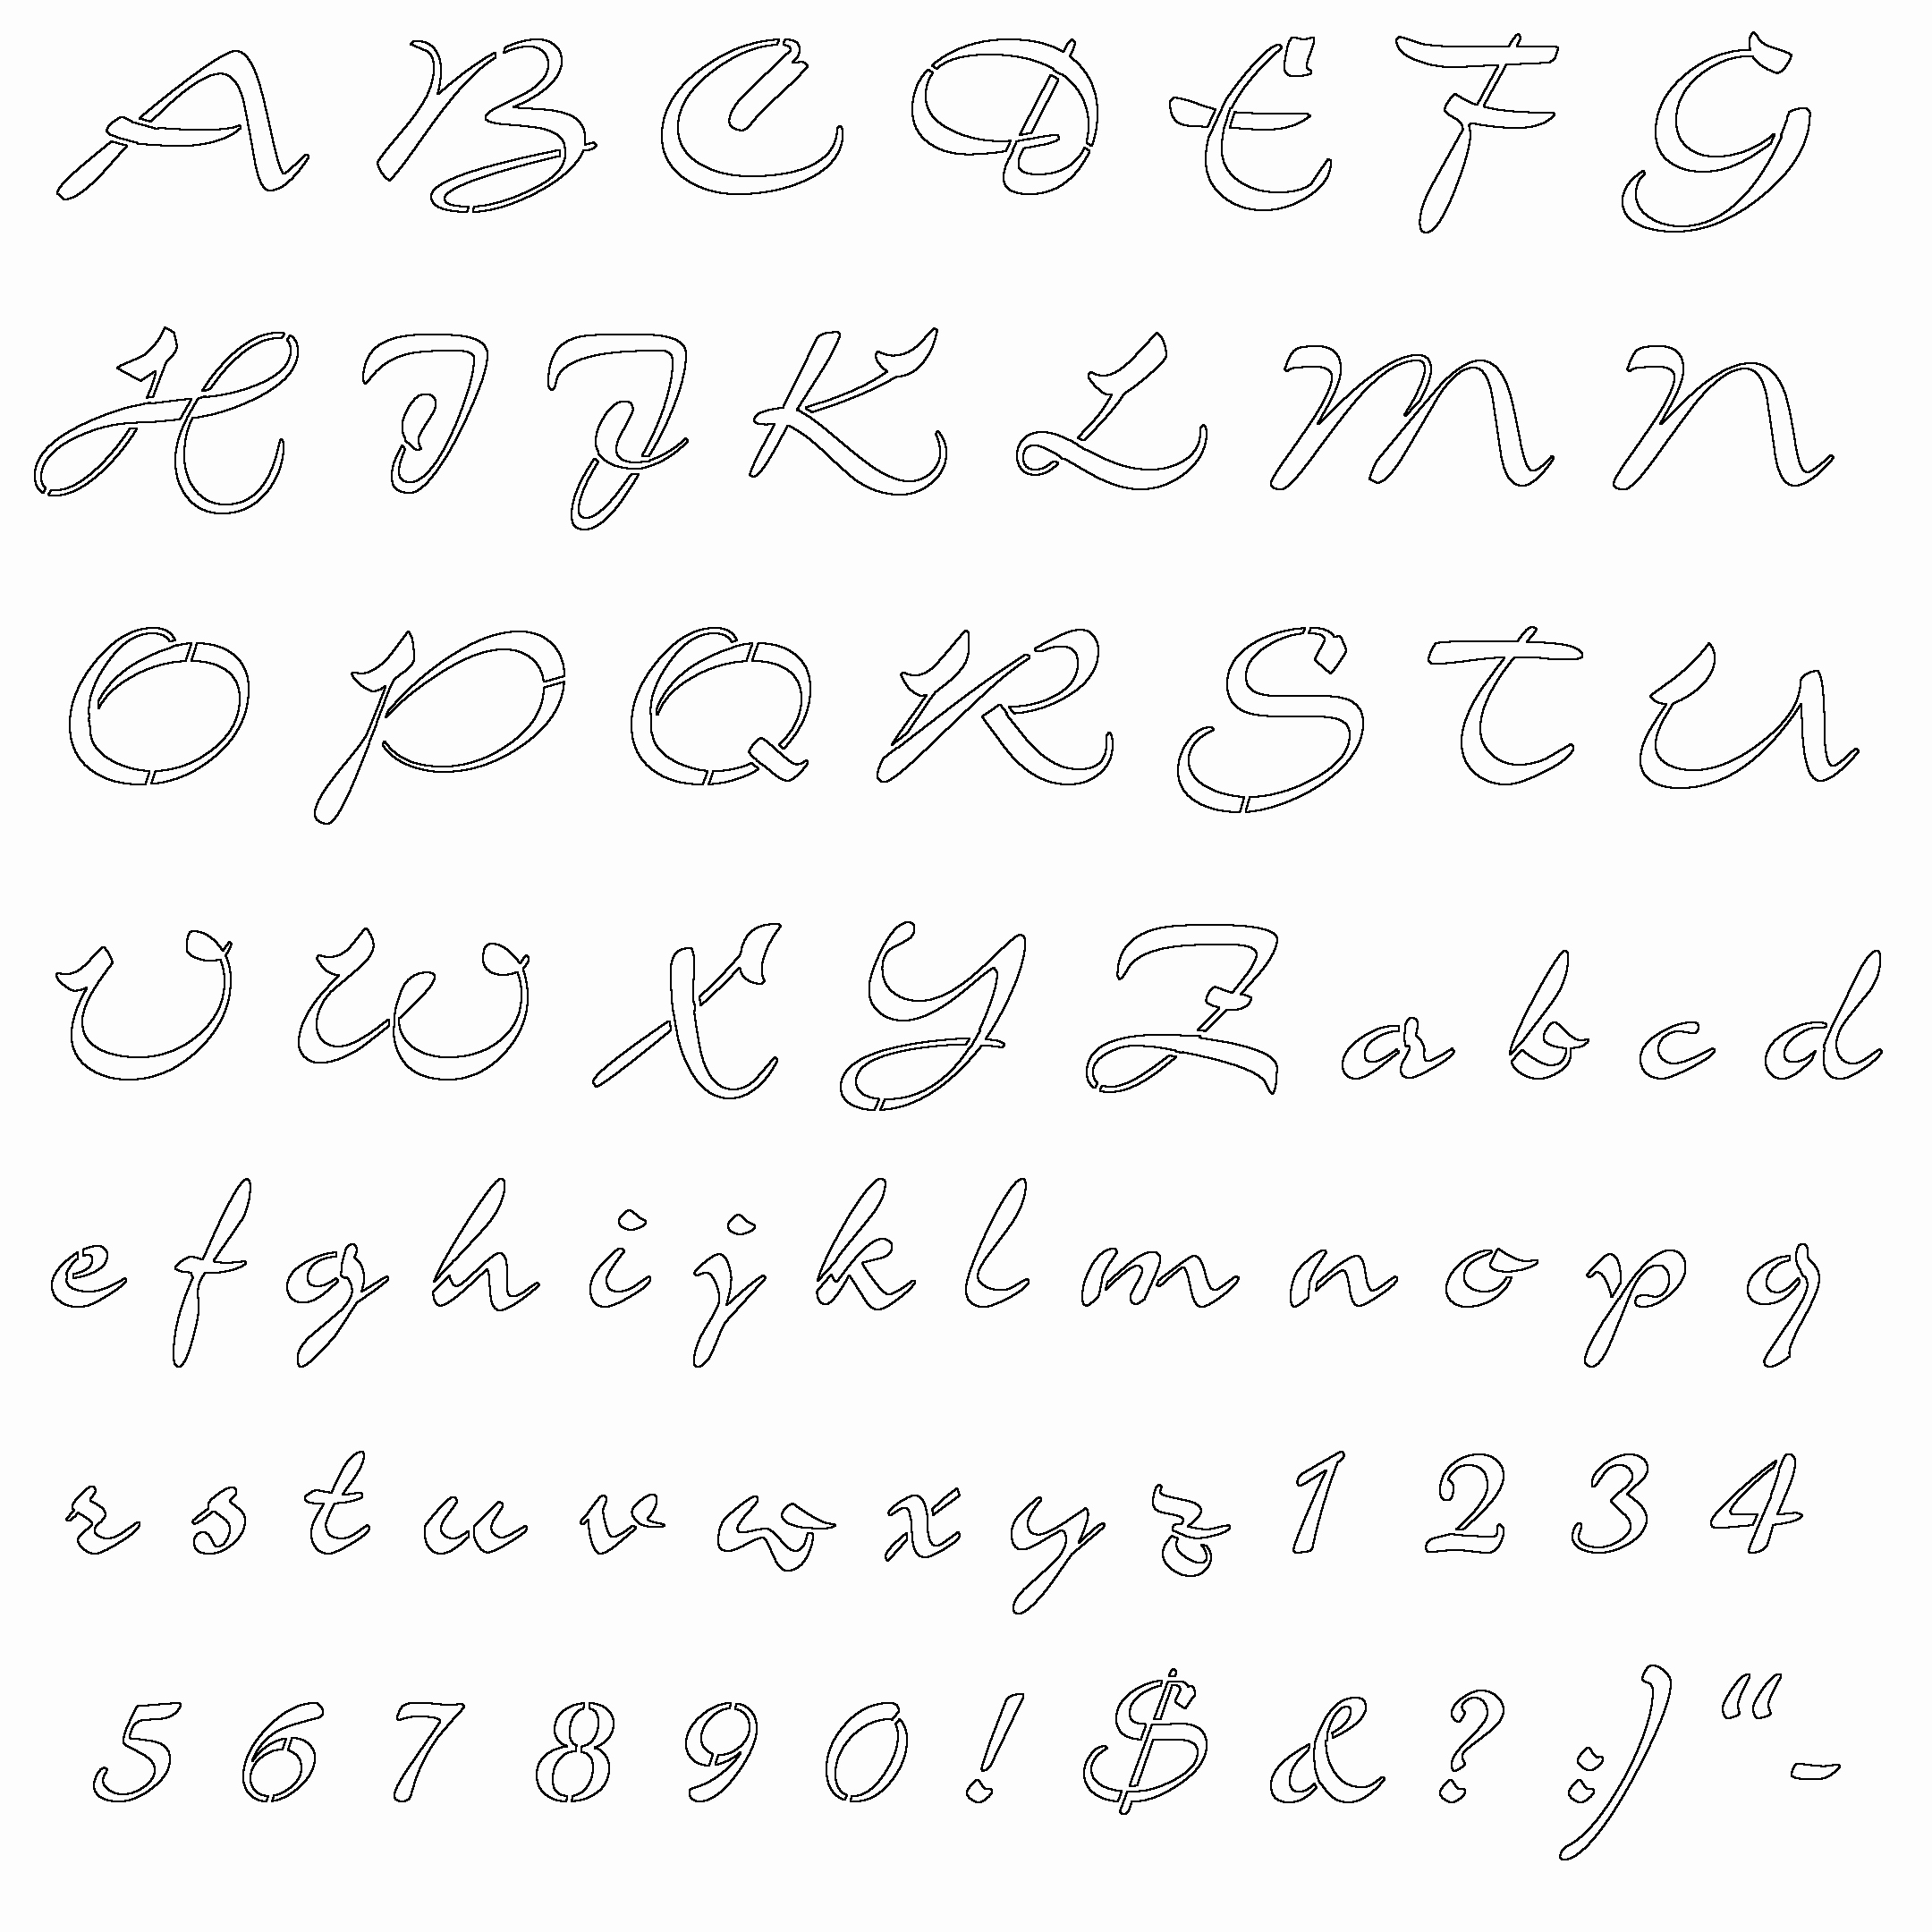 Letter Stencils to Print Free Inspirational Letter and Number Stencils Graduation Pinterest